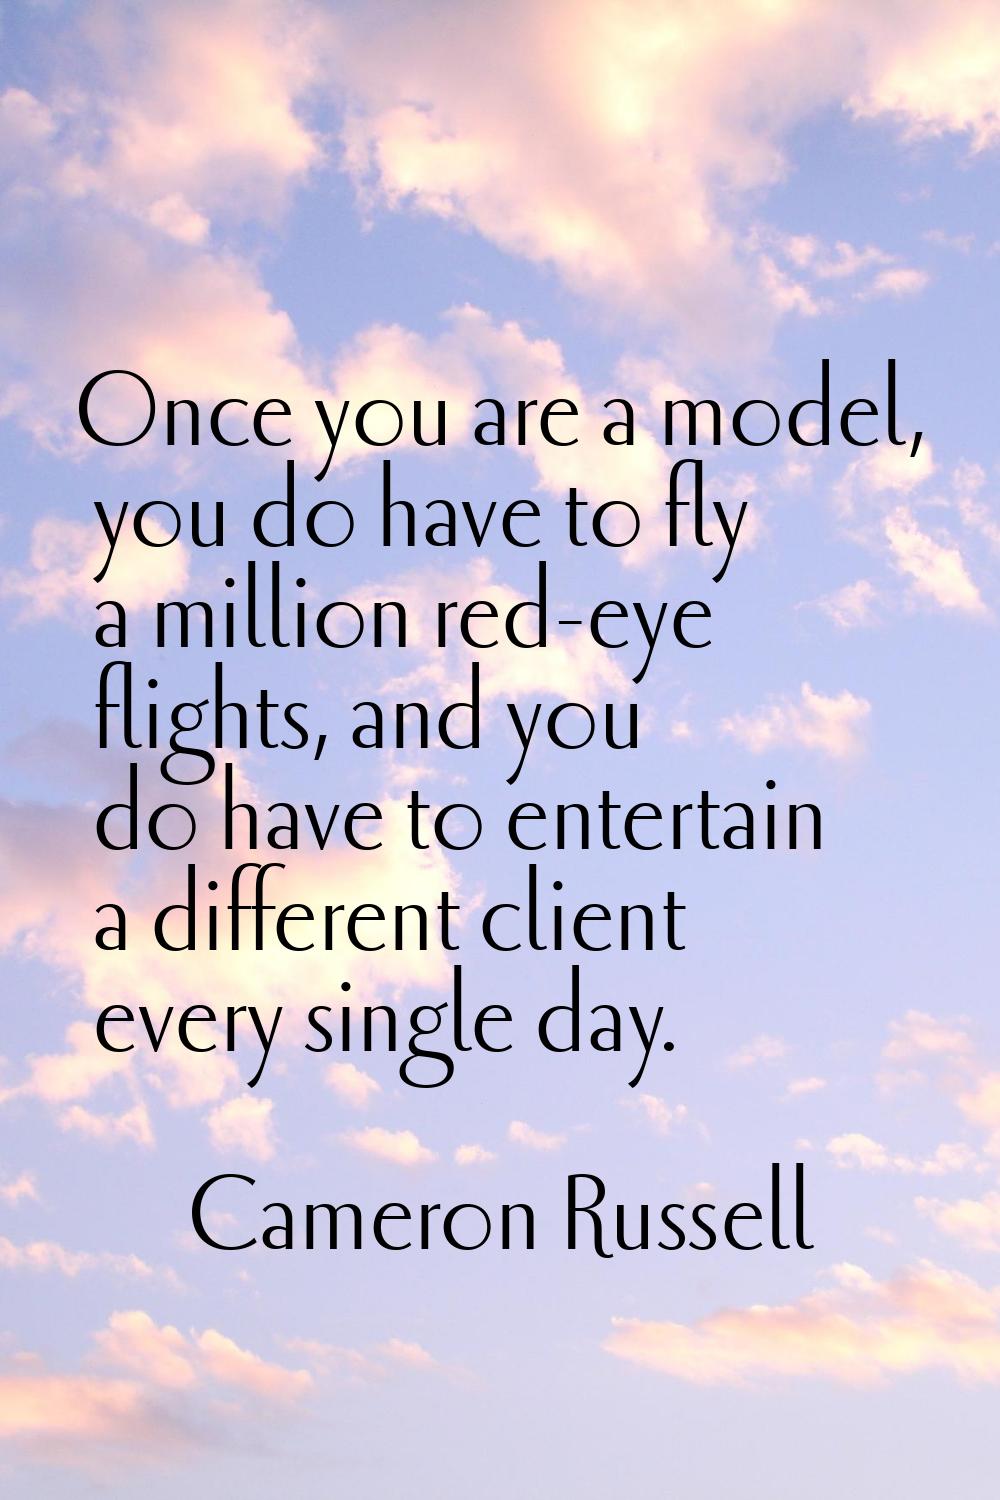 Once you are a model, you do have to fly a million red-eye flights, and you do have to entertain a 